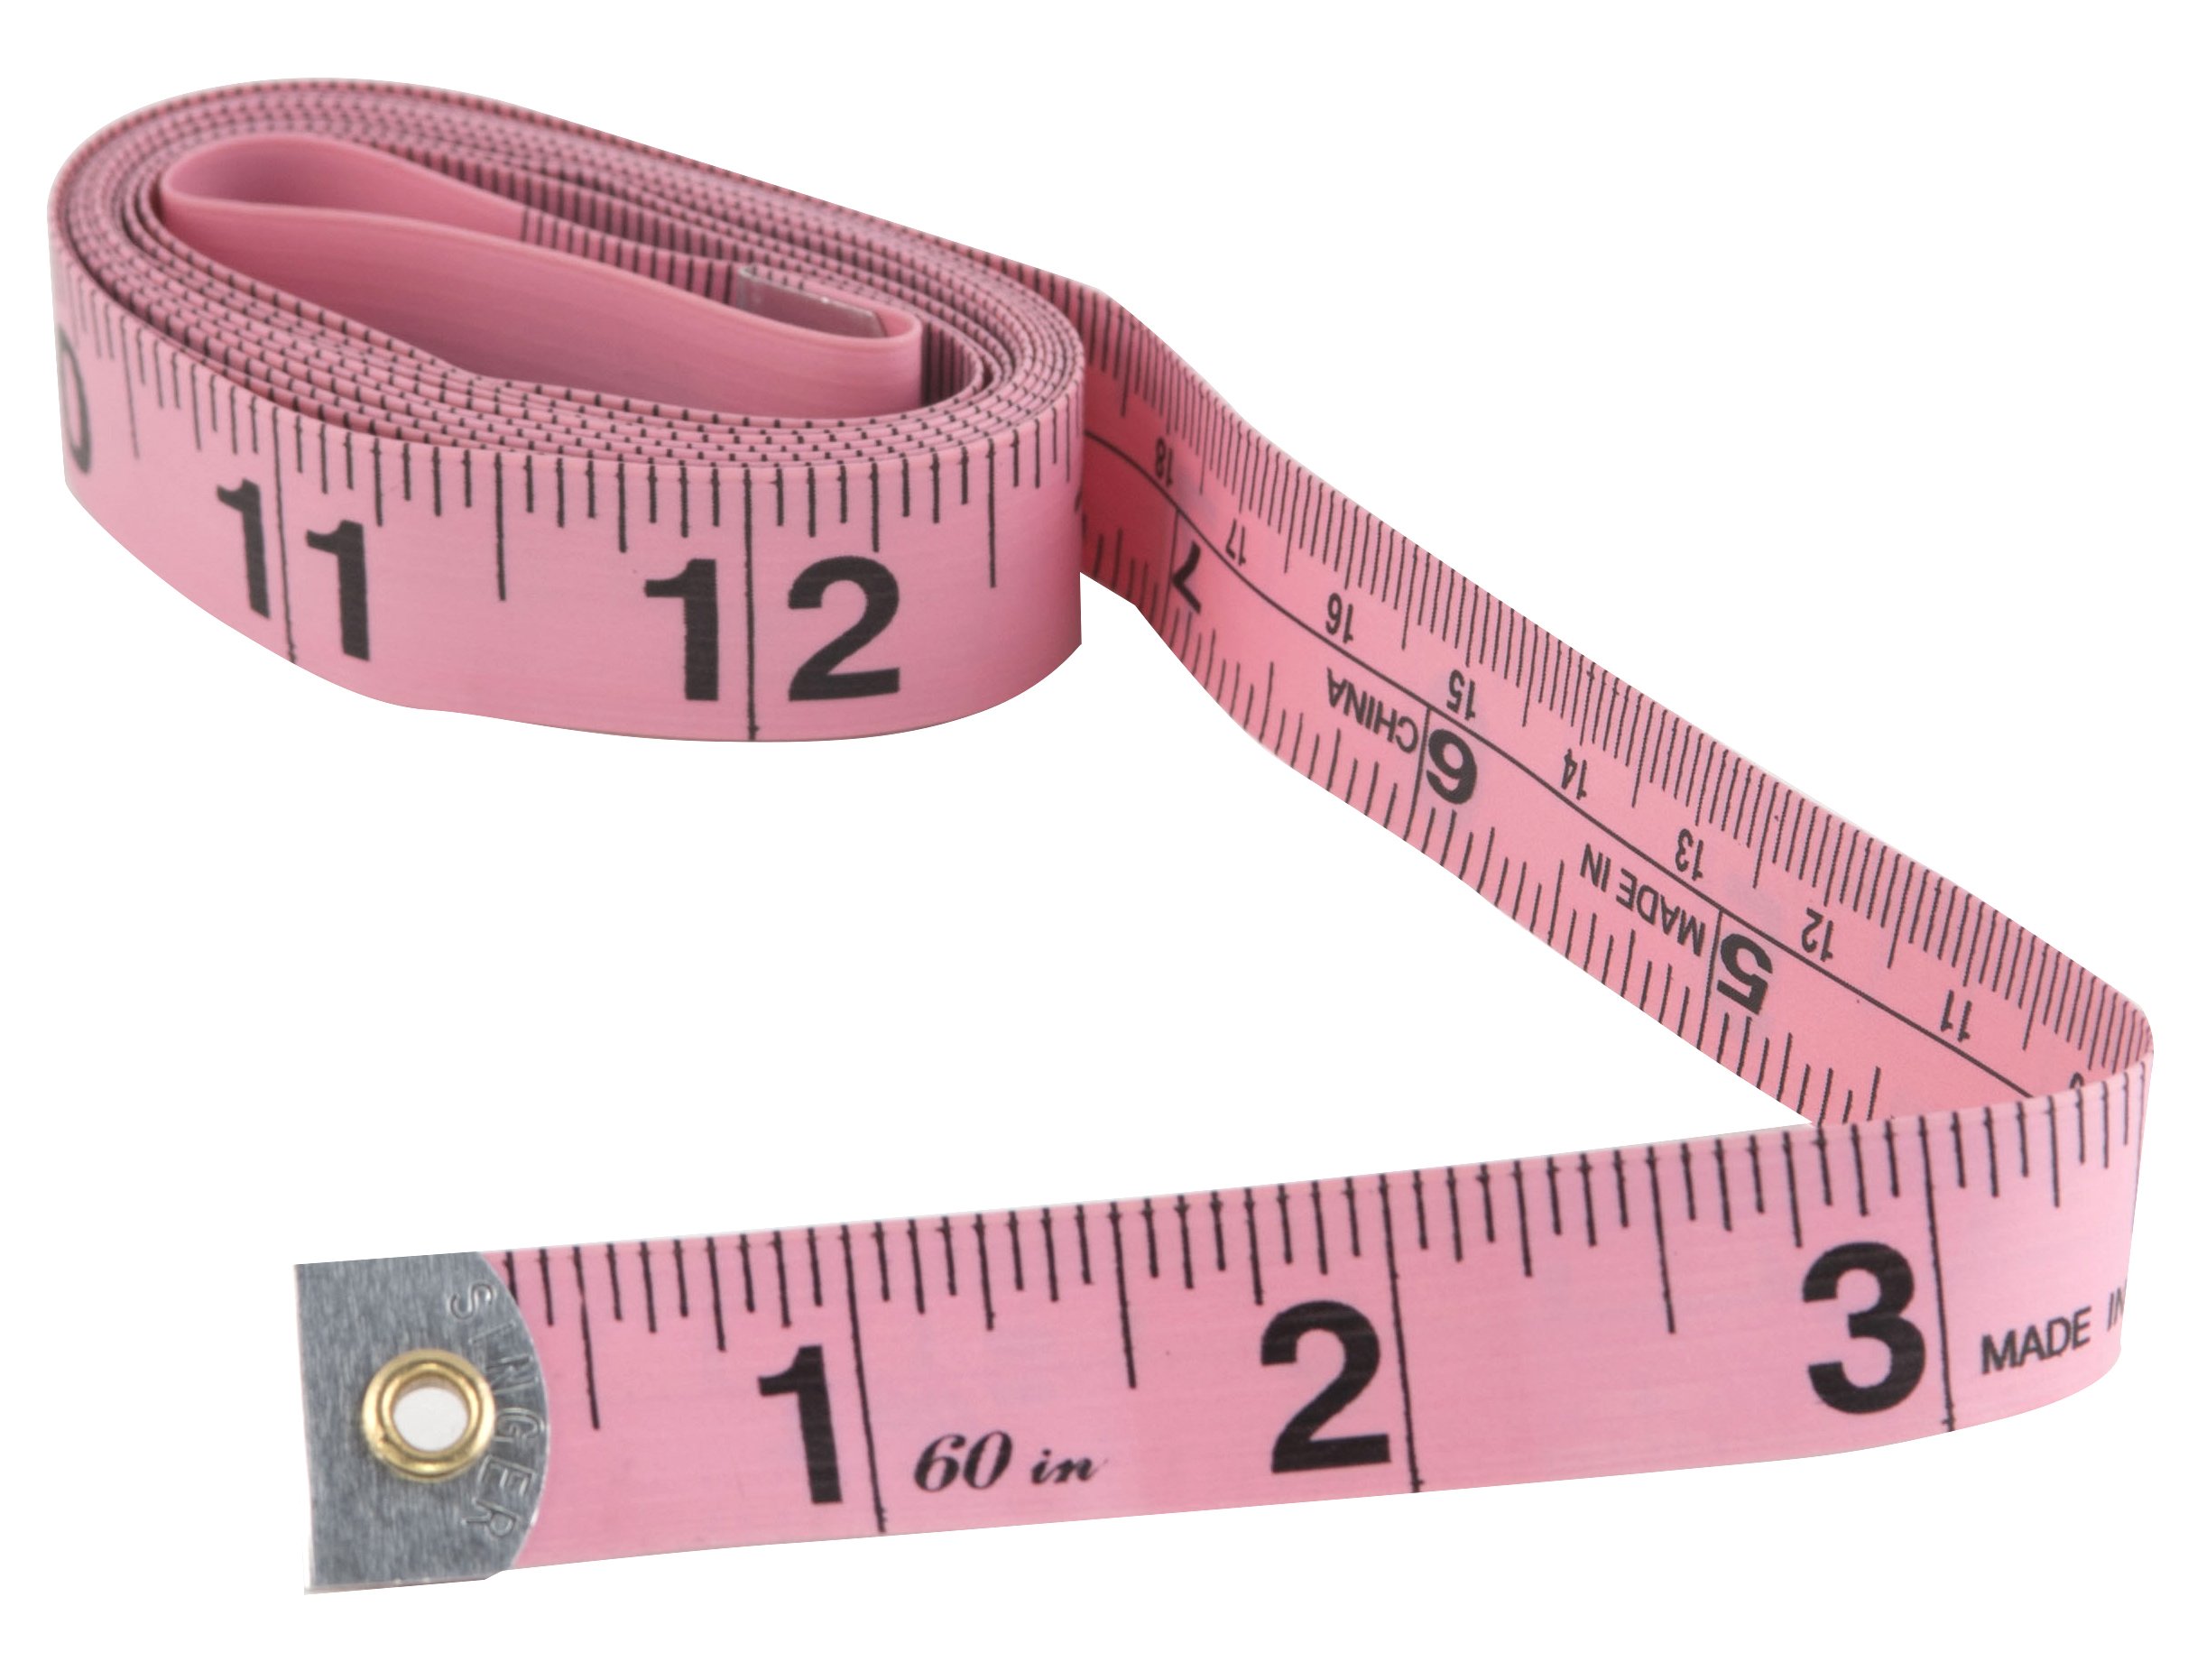 2 Pack Tape Measure Measuring Tape for Body Fabric Sewing Tailor Cloth Knitting Vinyl Home Craft Measurements, 60-Inch Soft Fashion Pink